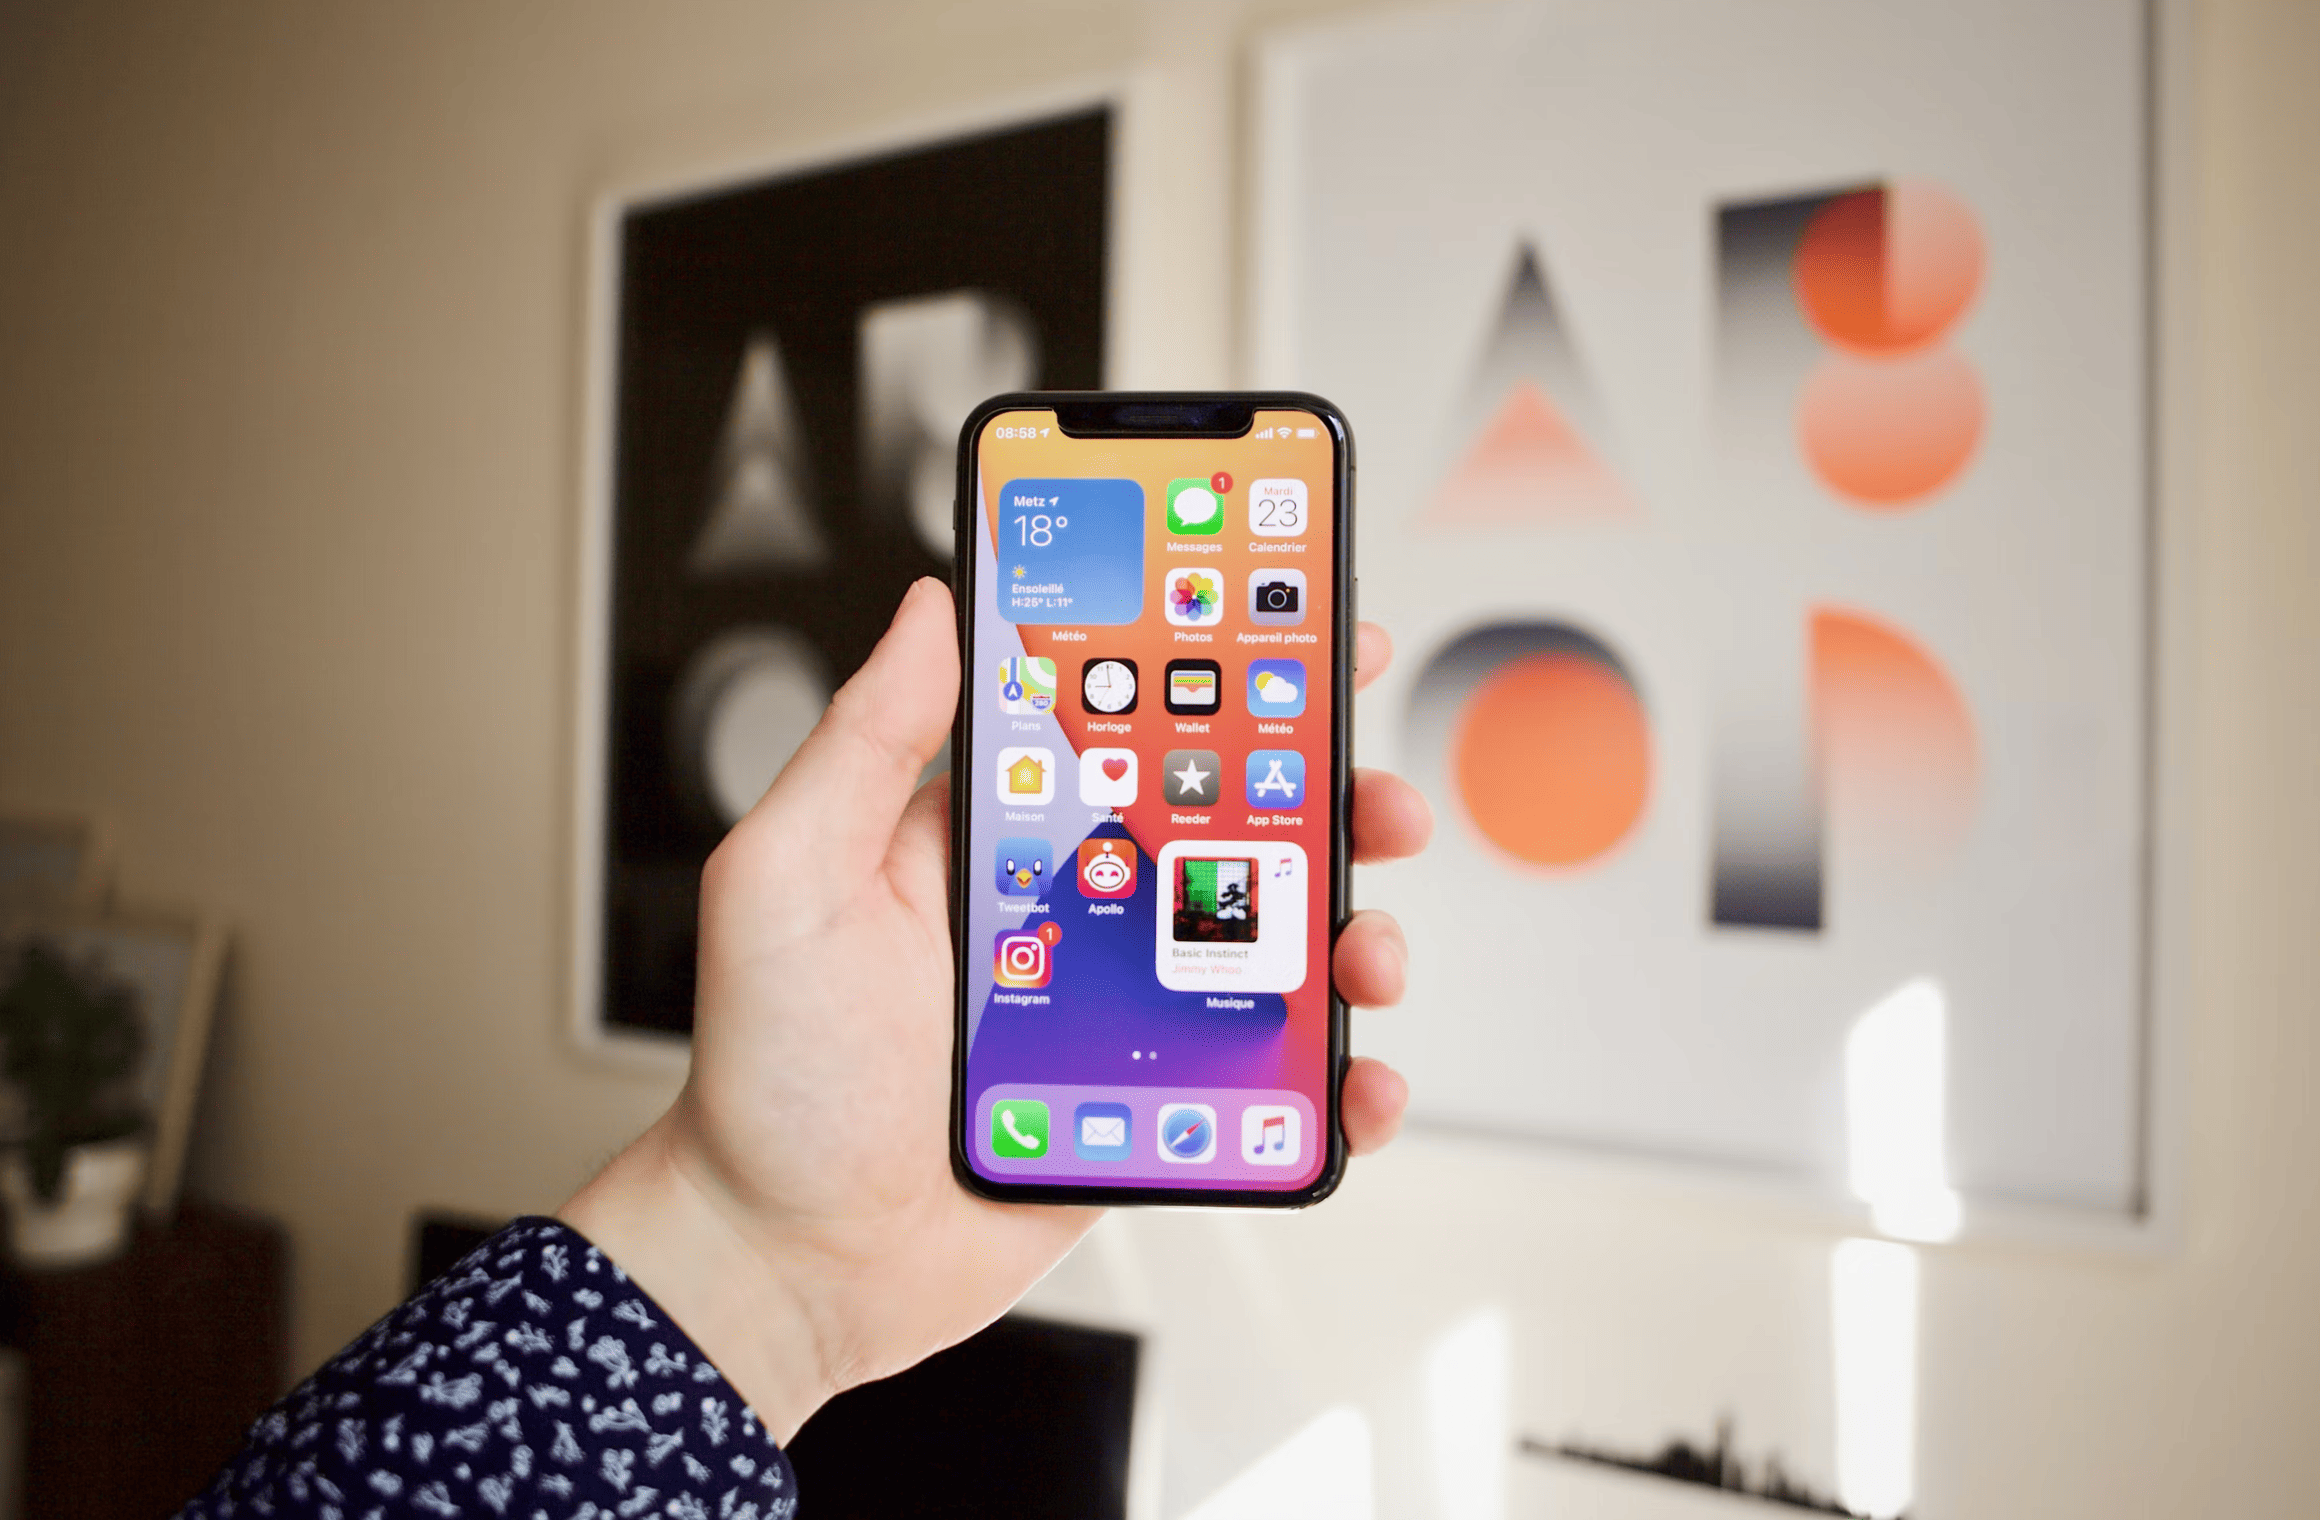 How to uninstall apps on iPhone How to remove apps from iPhone